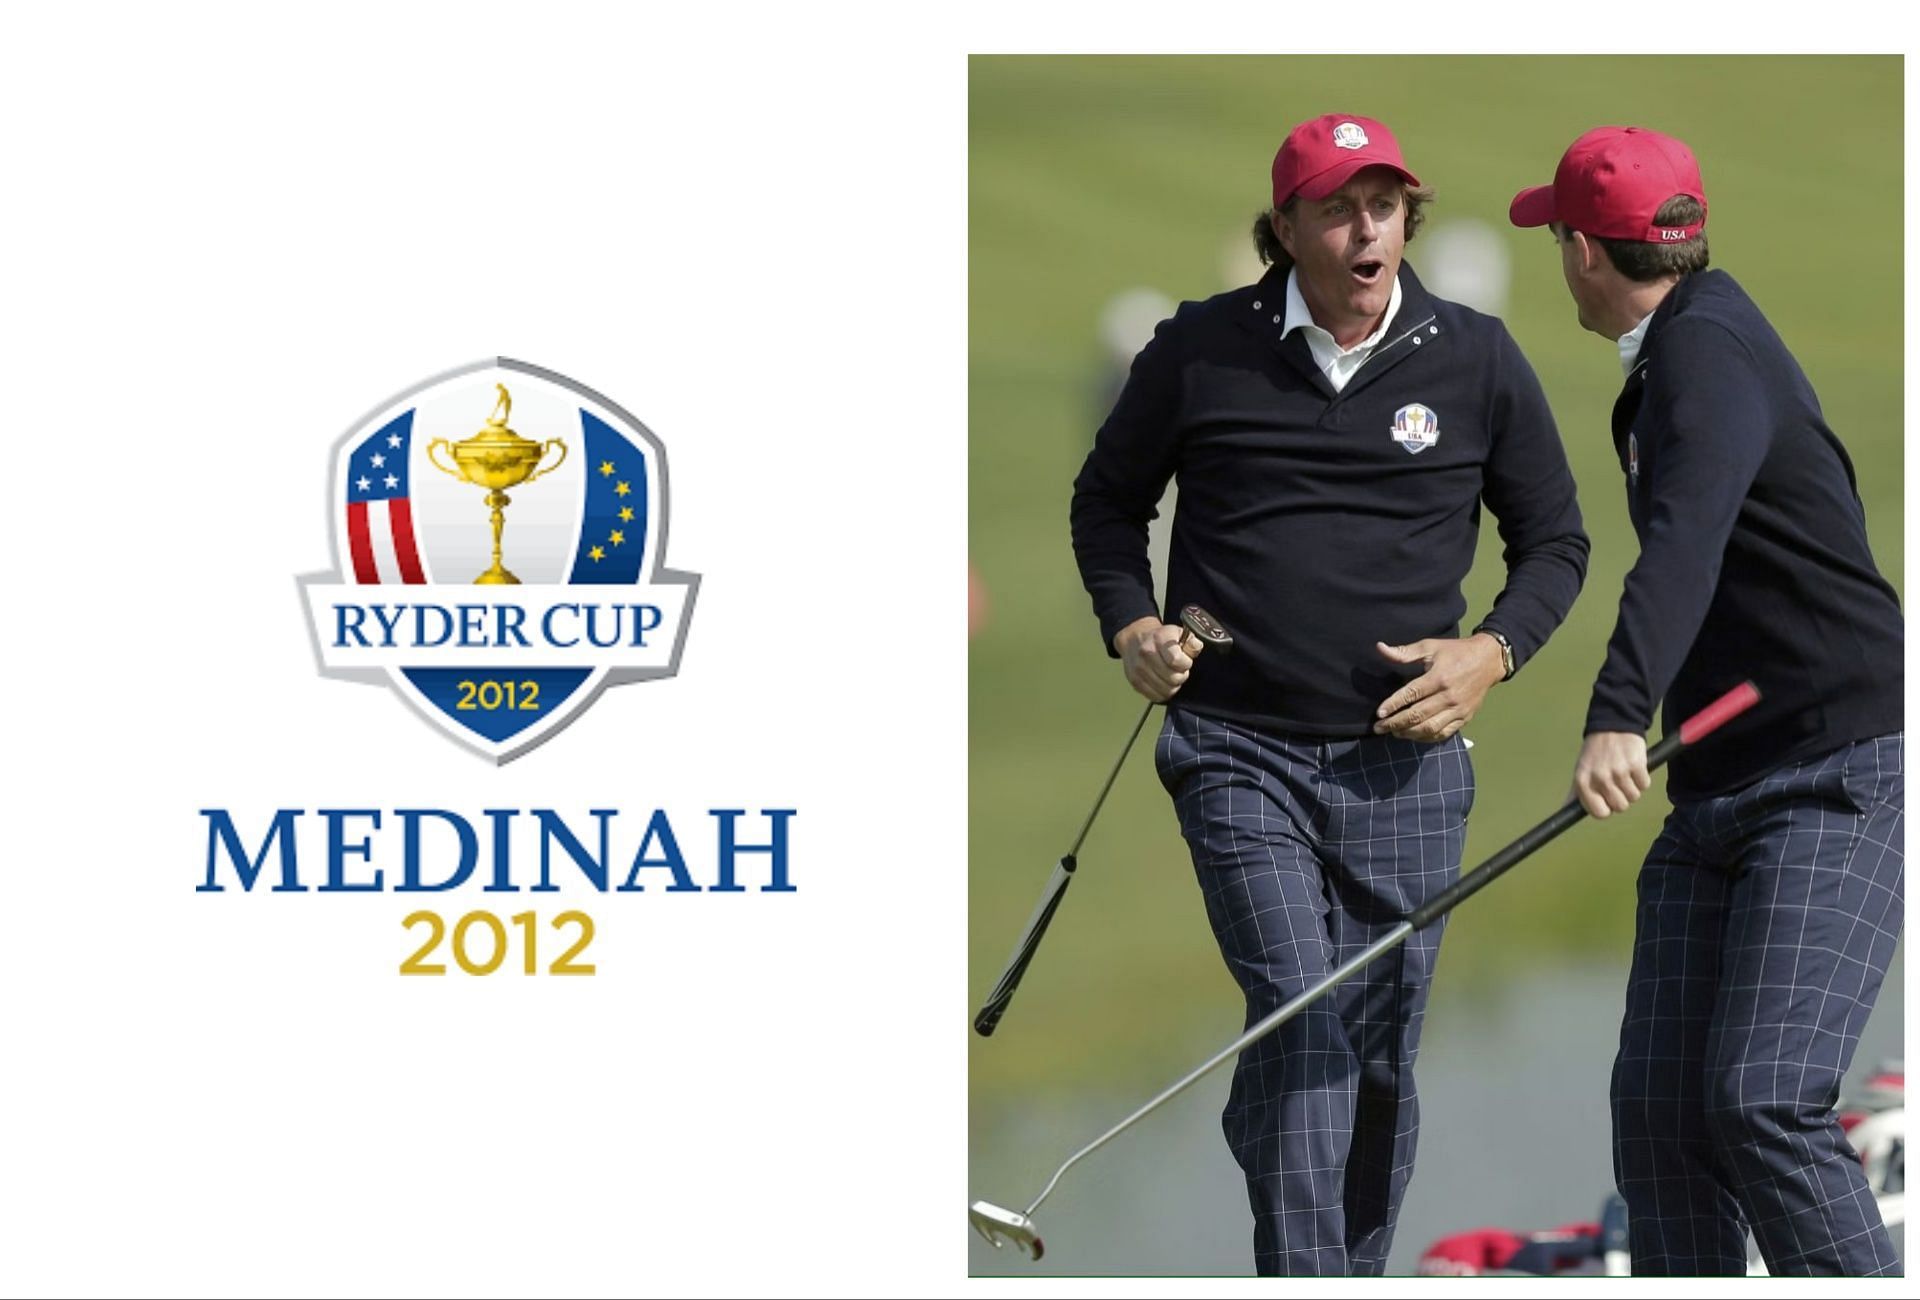 Phil Mickelson winning a hole in Ryder Cup 2012. The logo of Ryder Cup 2012.